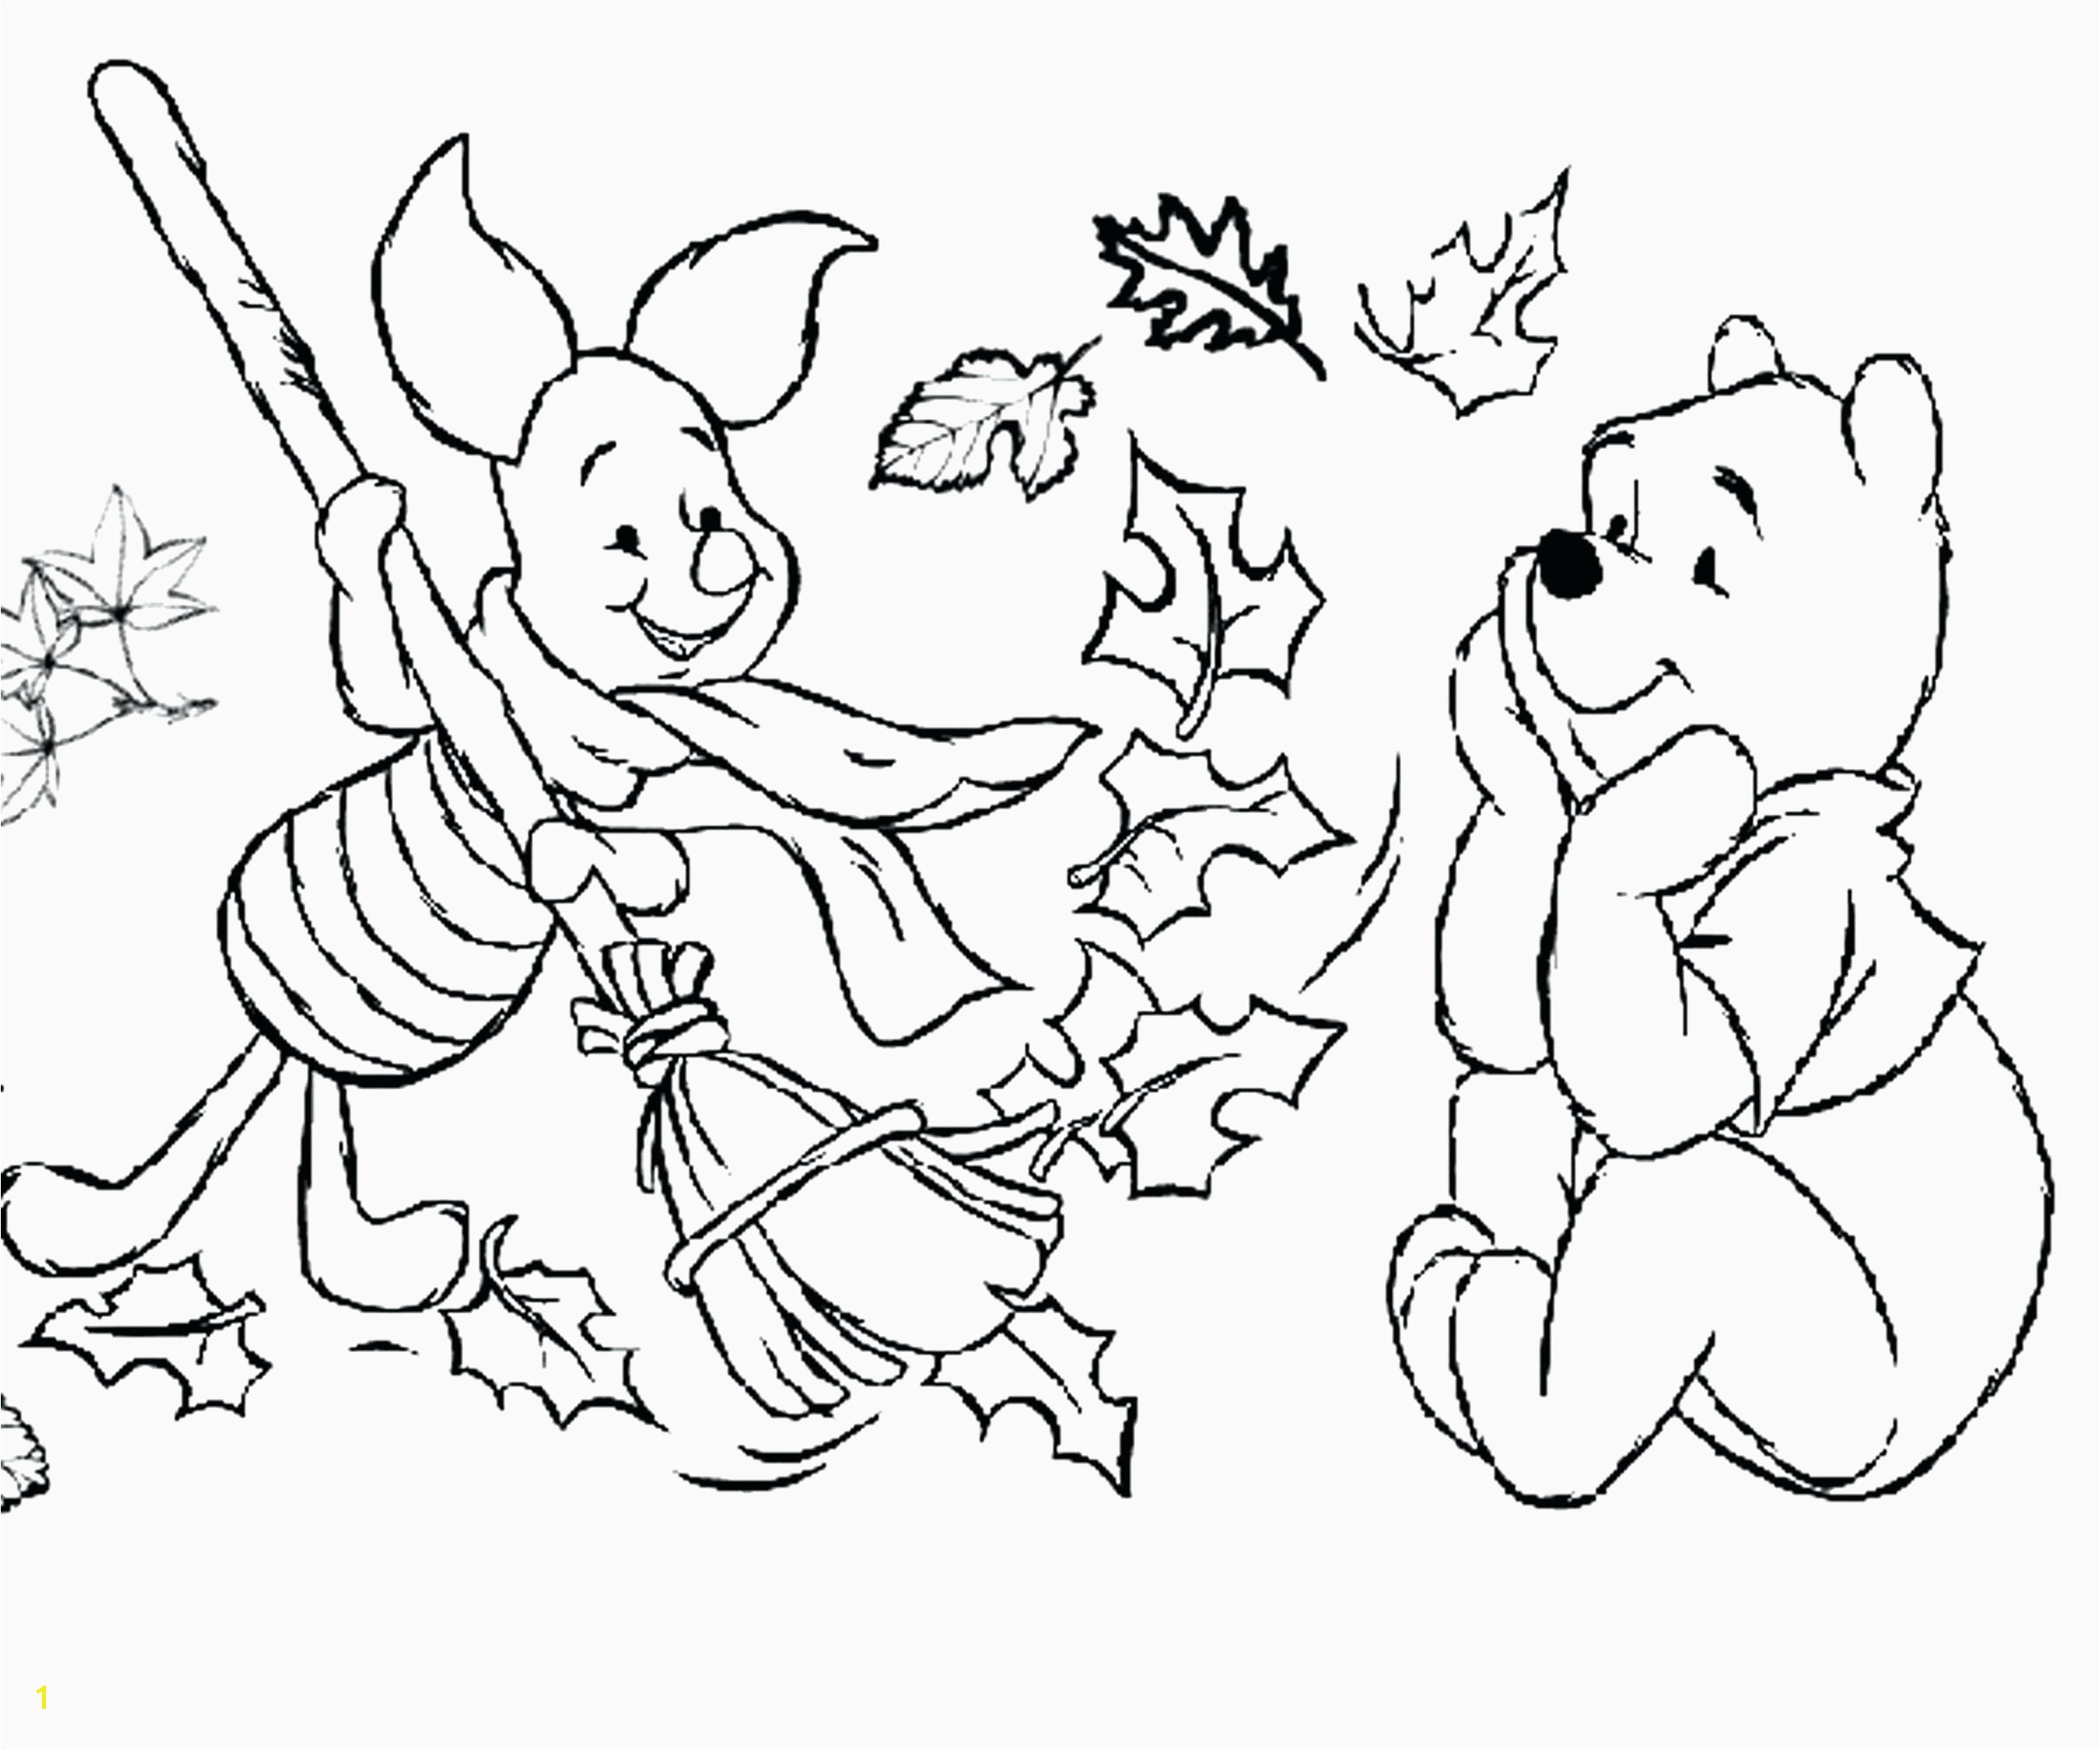 Www Coloring Pages for Kids Com | divyajanani.org